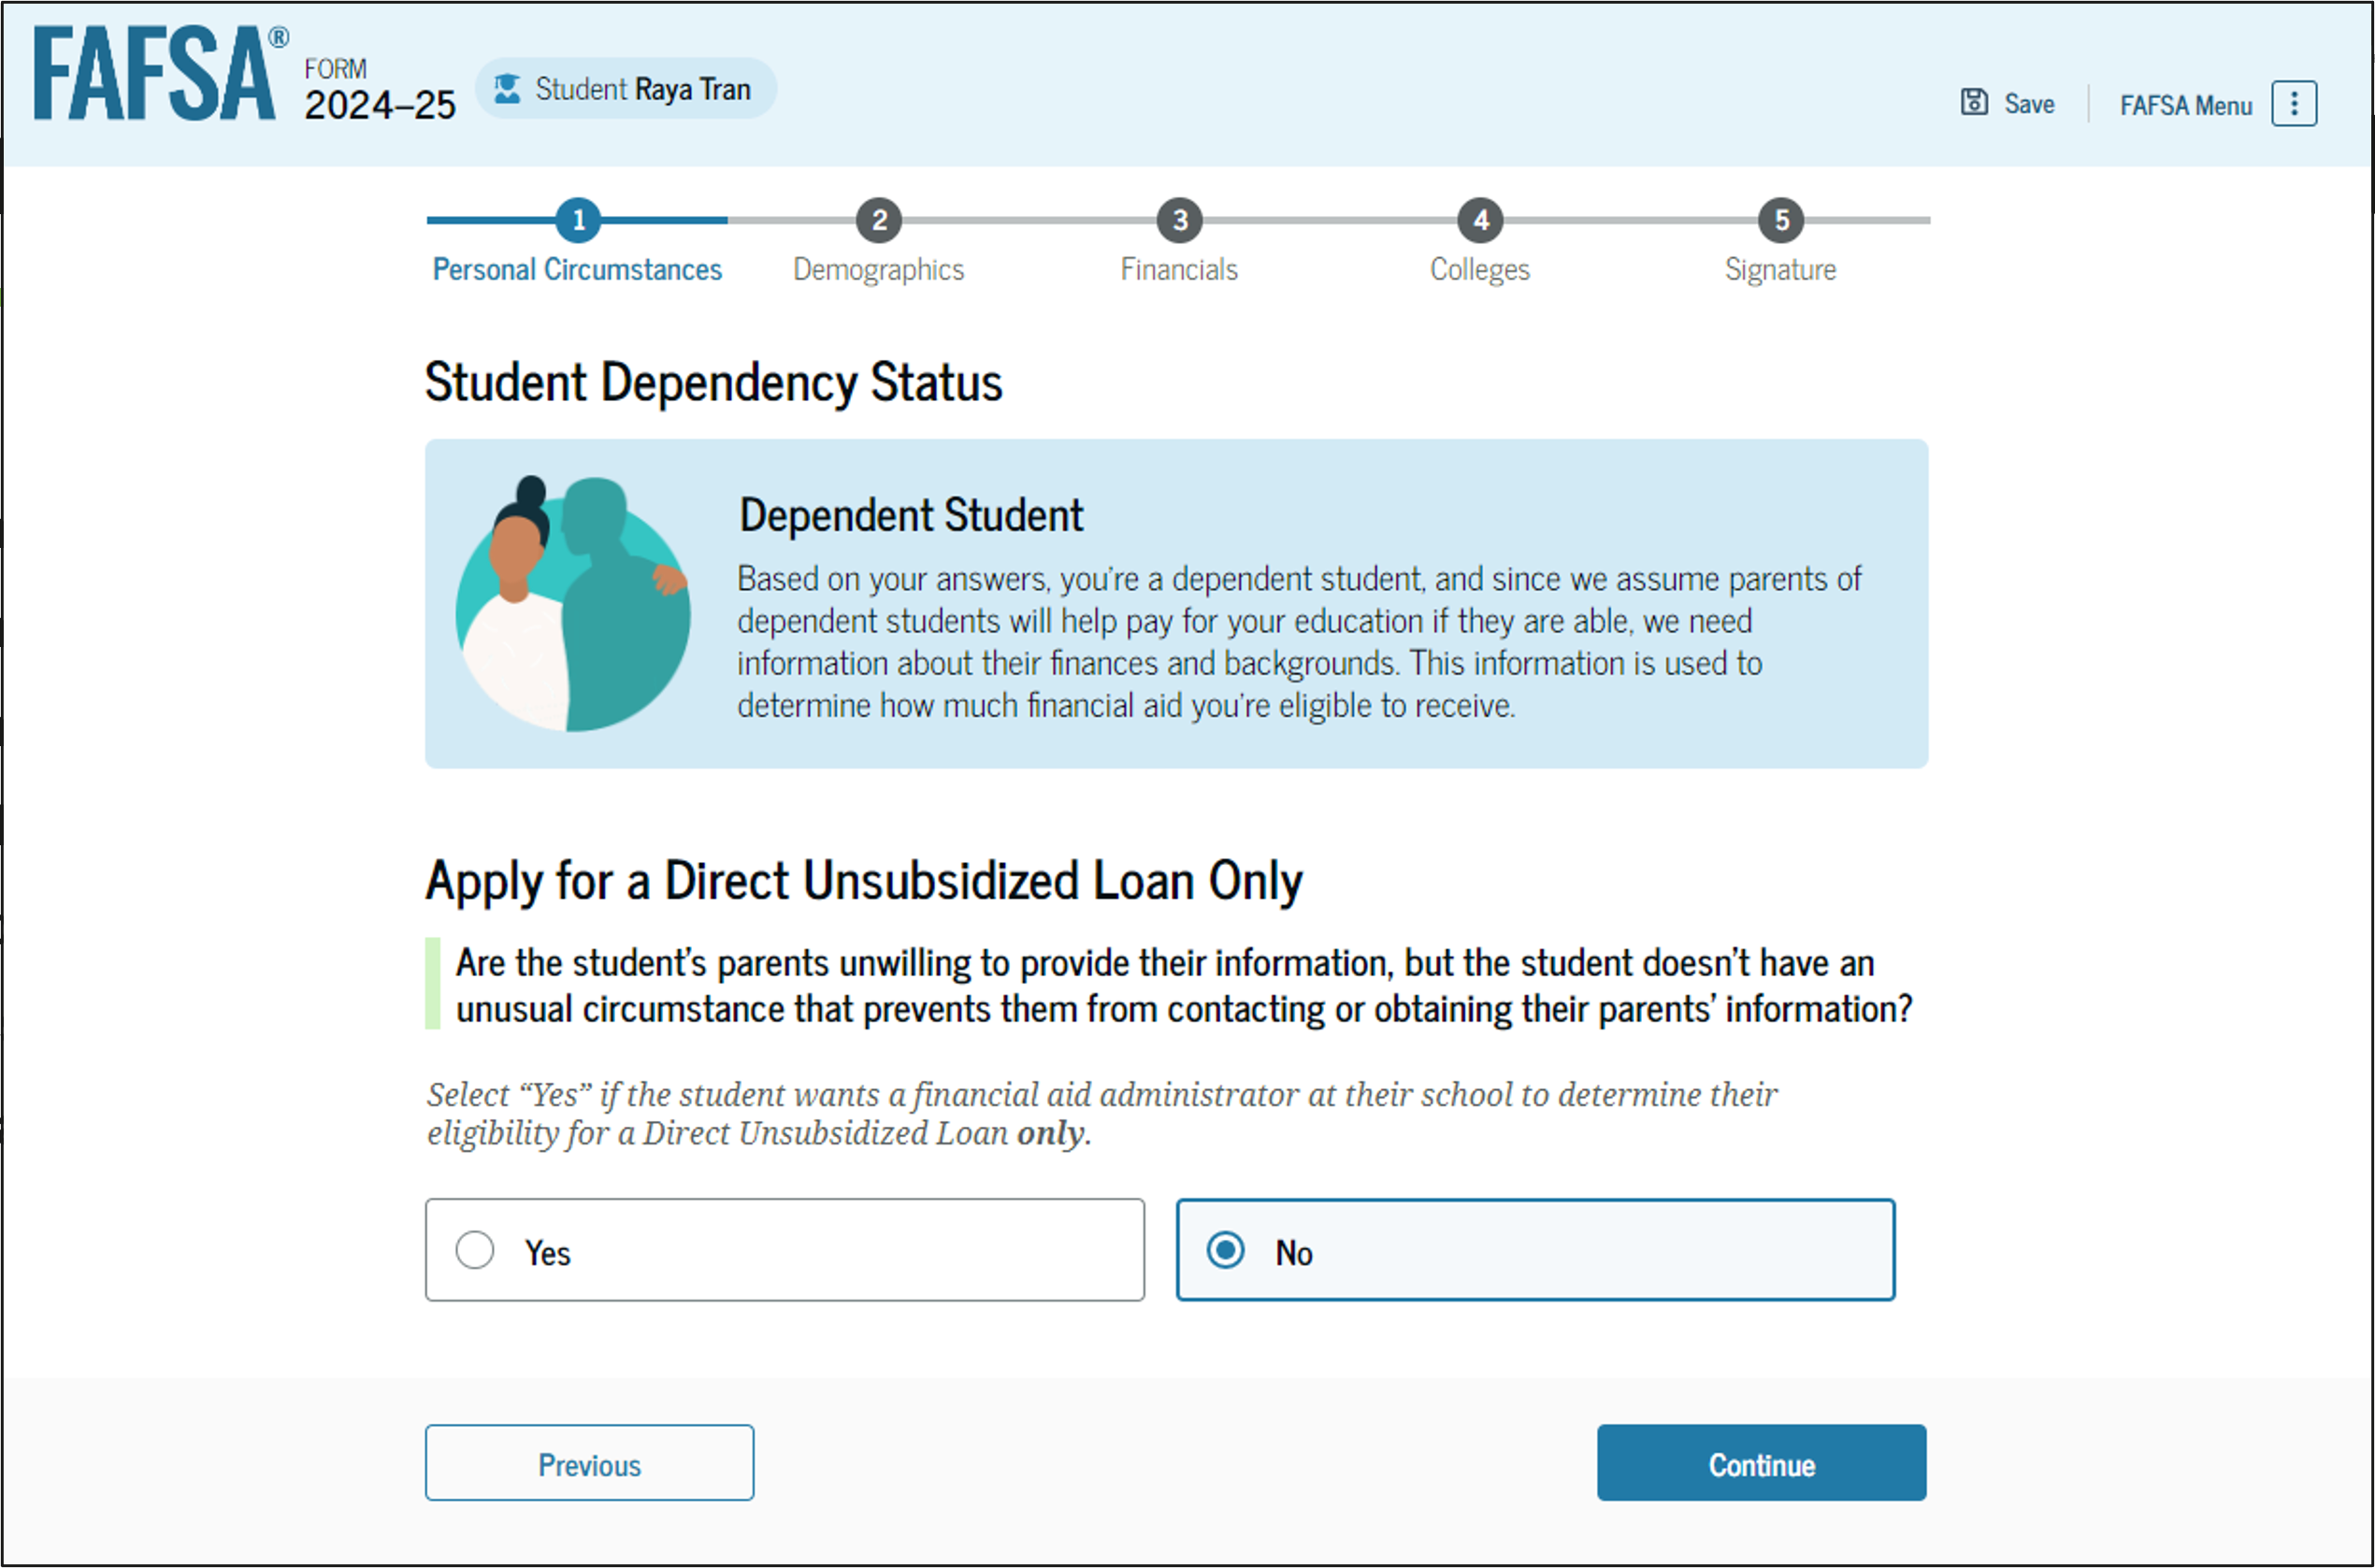 Fafsa guide screenshot of apply for a direct unsubsidized loan only.